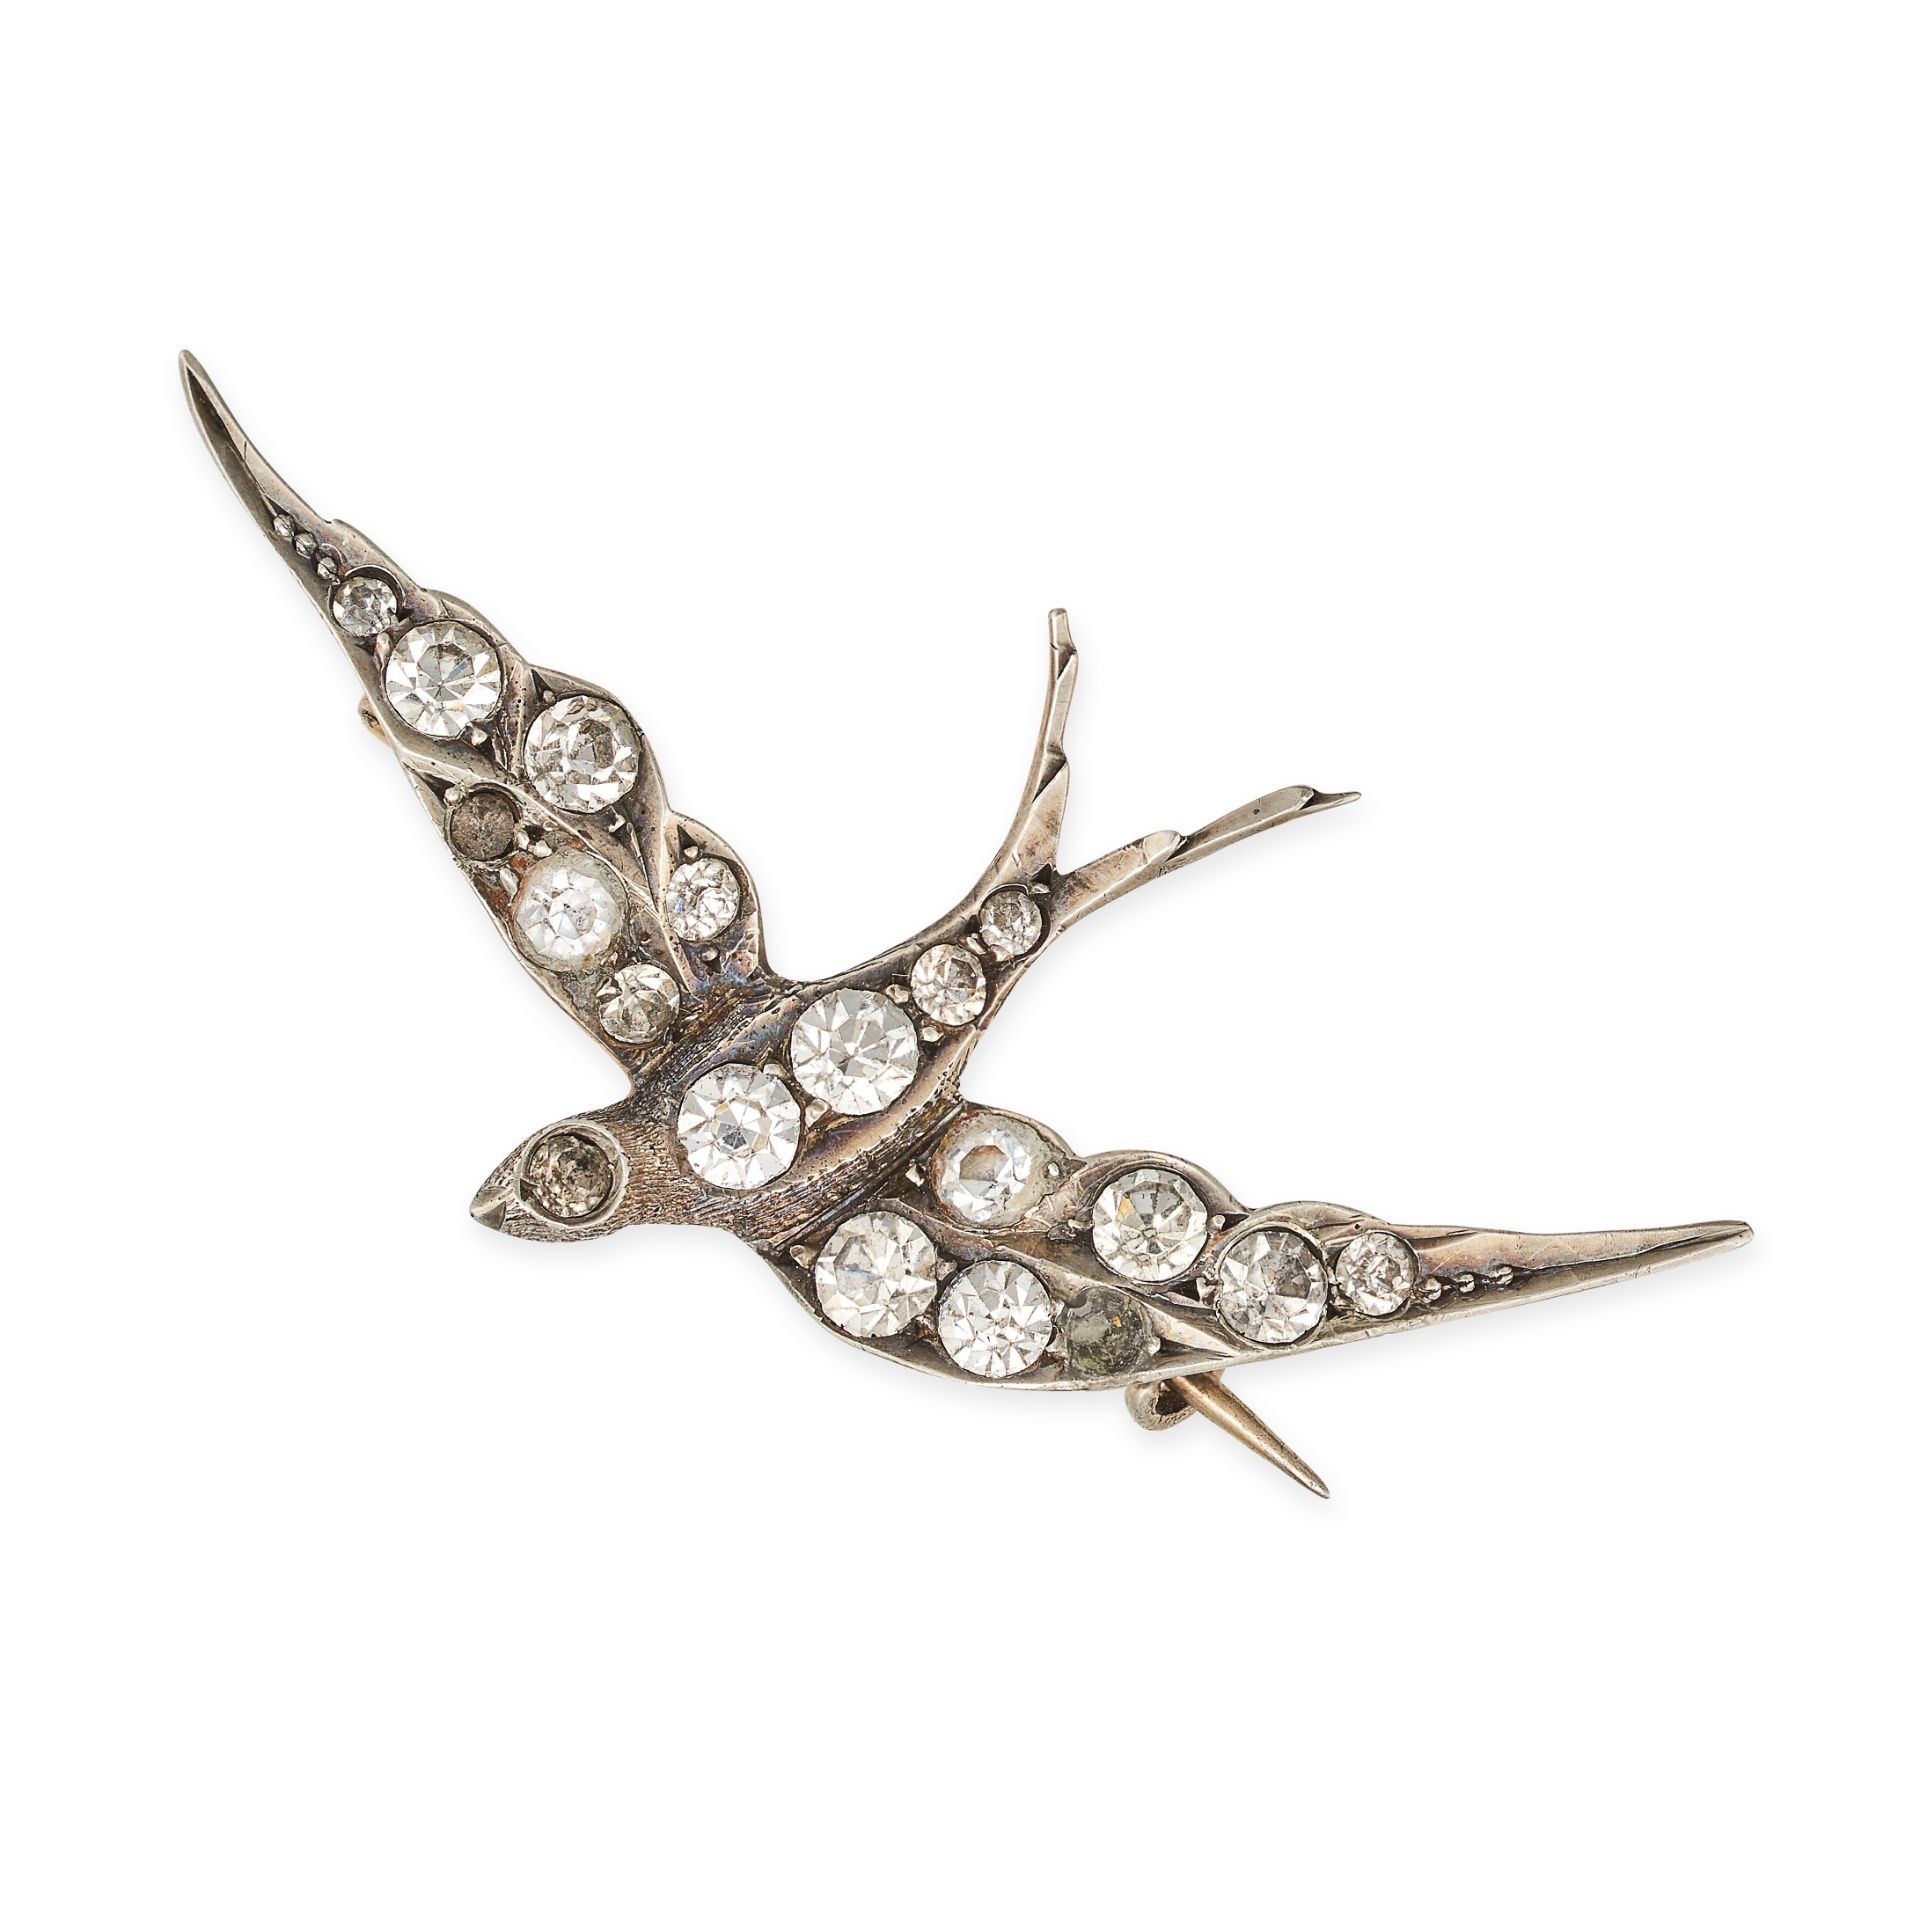 NO RESERVE - A WHITE GEMSTONE SWALLOW BROOCH designed as a swallow in flight, set throughout with...